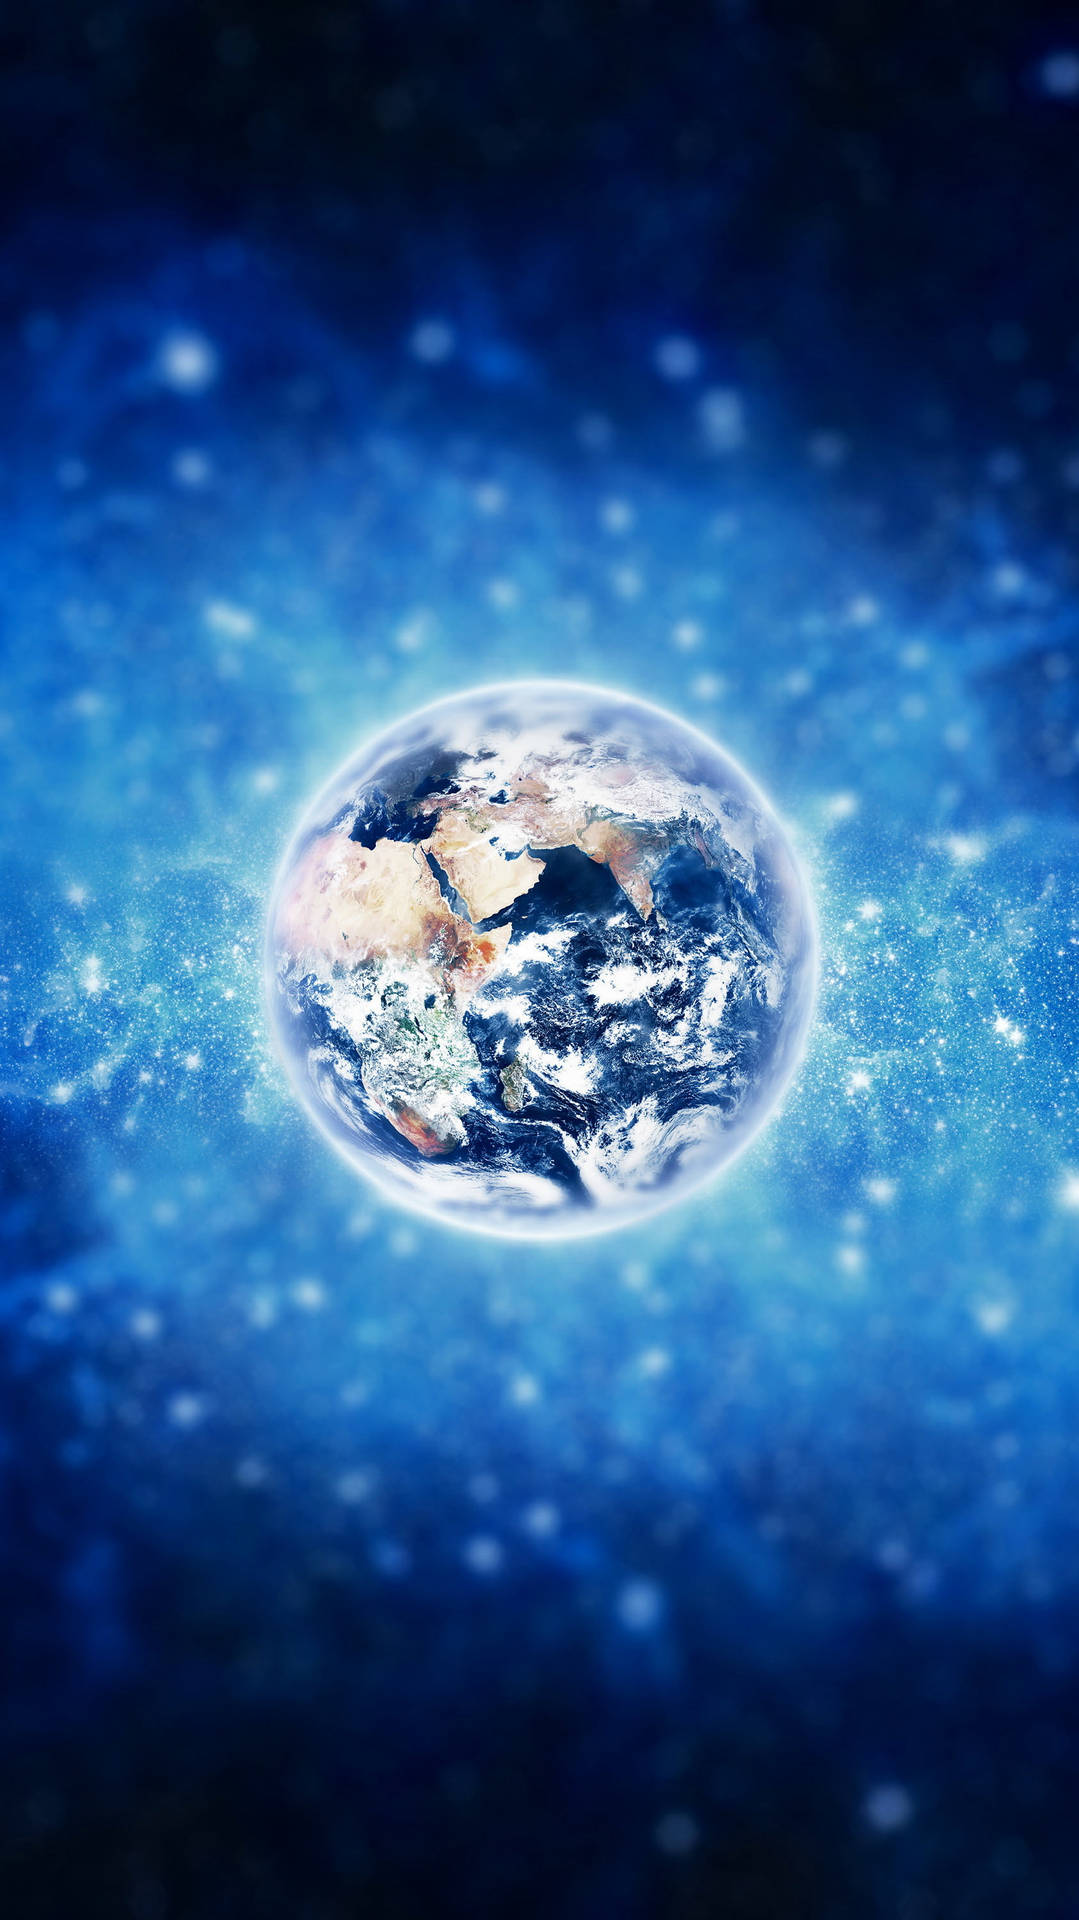 Planet Earth Space Phone Wallpaper